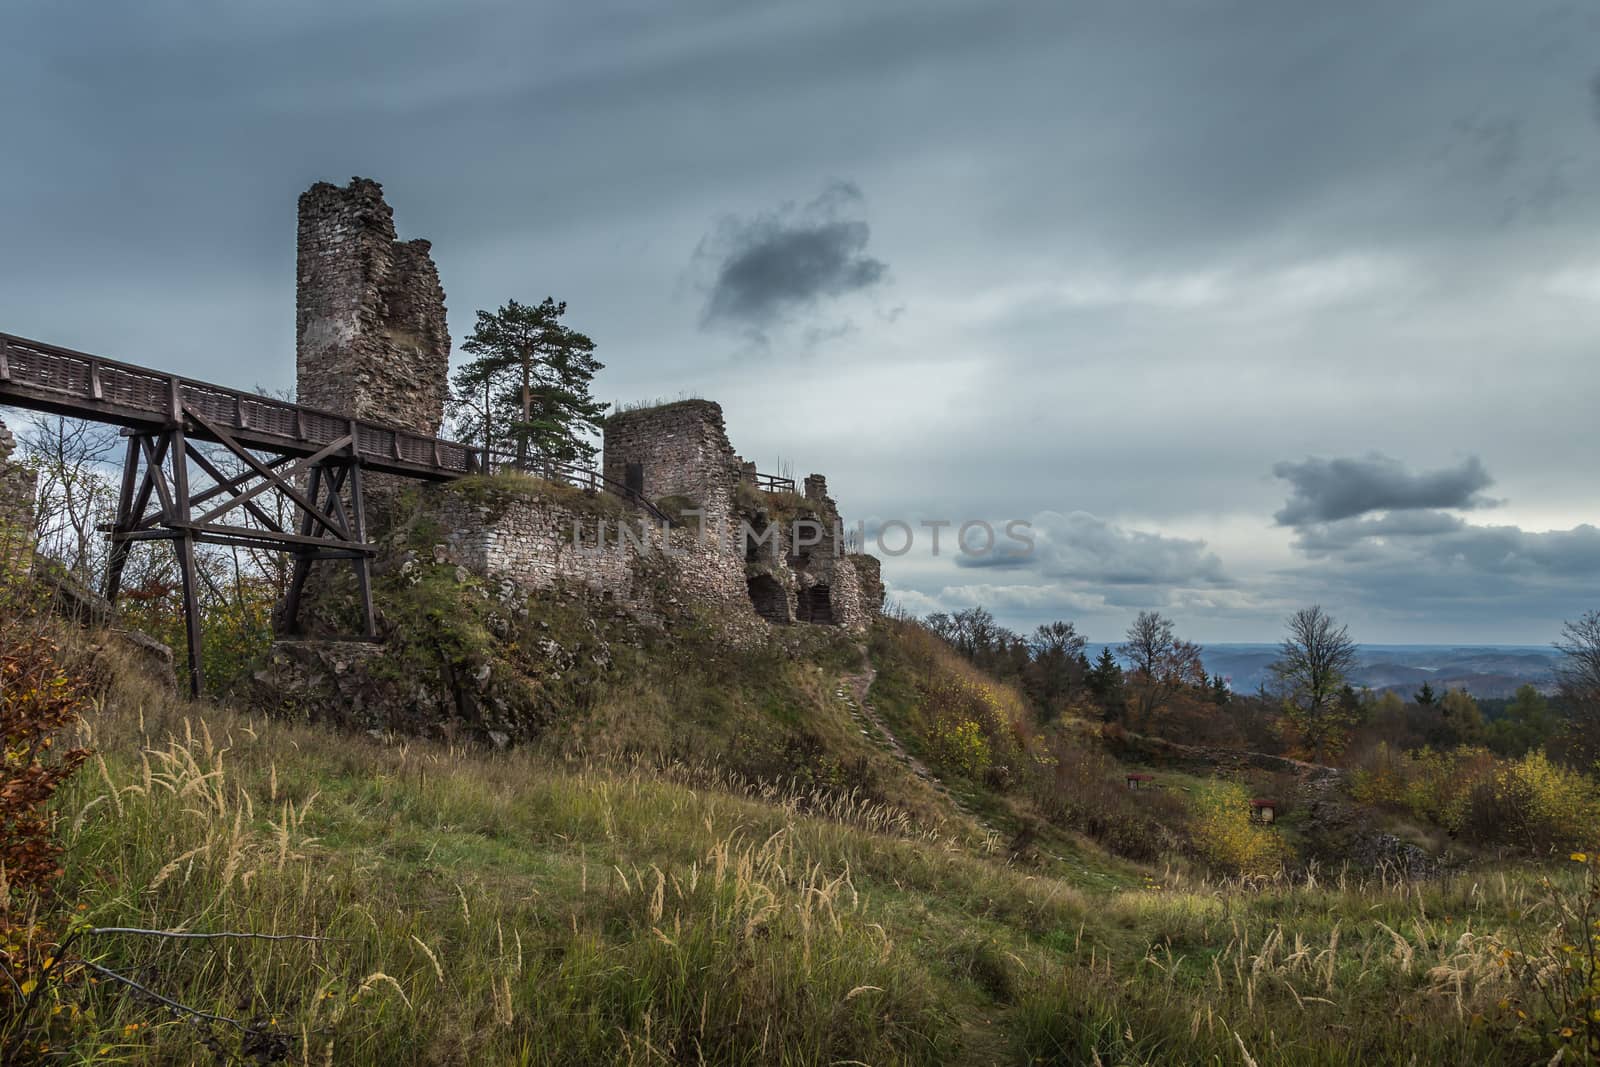 Zubstejn ruins of the castle built in the 13th century. It stands on a hill above the village Pivonice in Czech Republic. Overcast day. Also known as Zuberstein or Zubstein. by petrsvoboda91